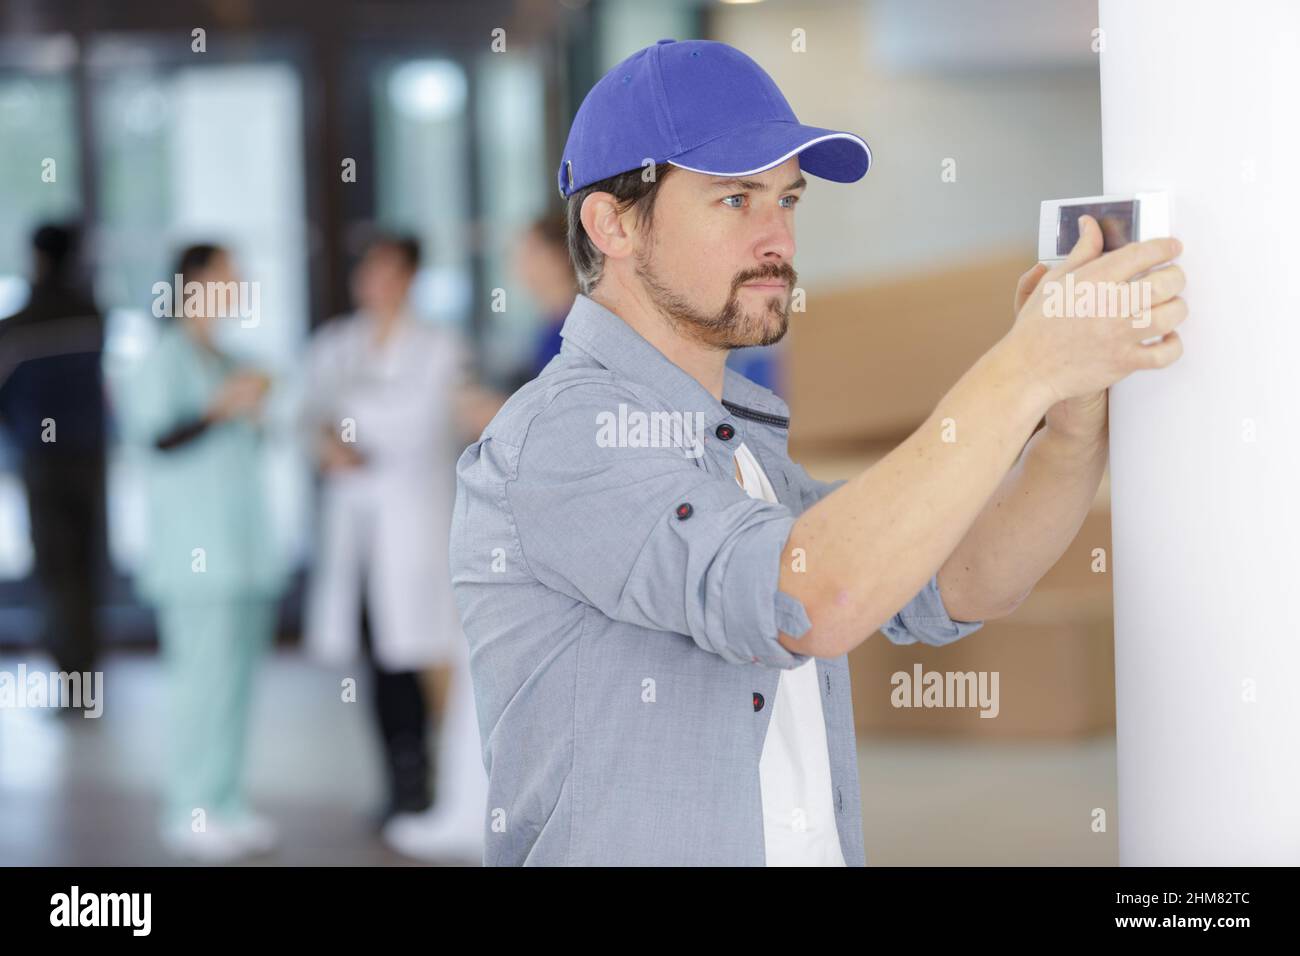 a male worker installing thermostat Stock Photo